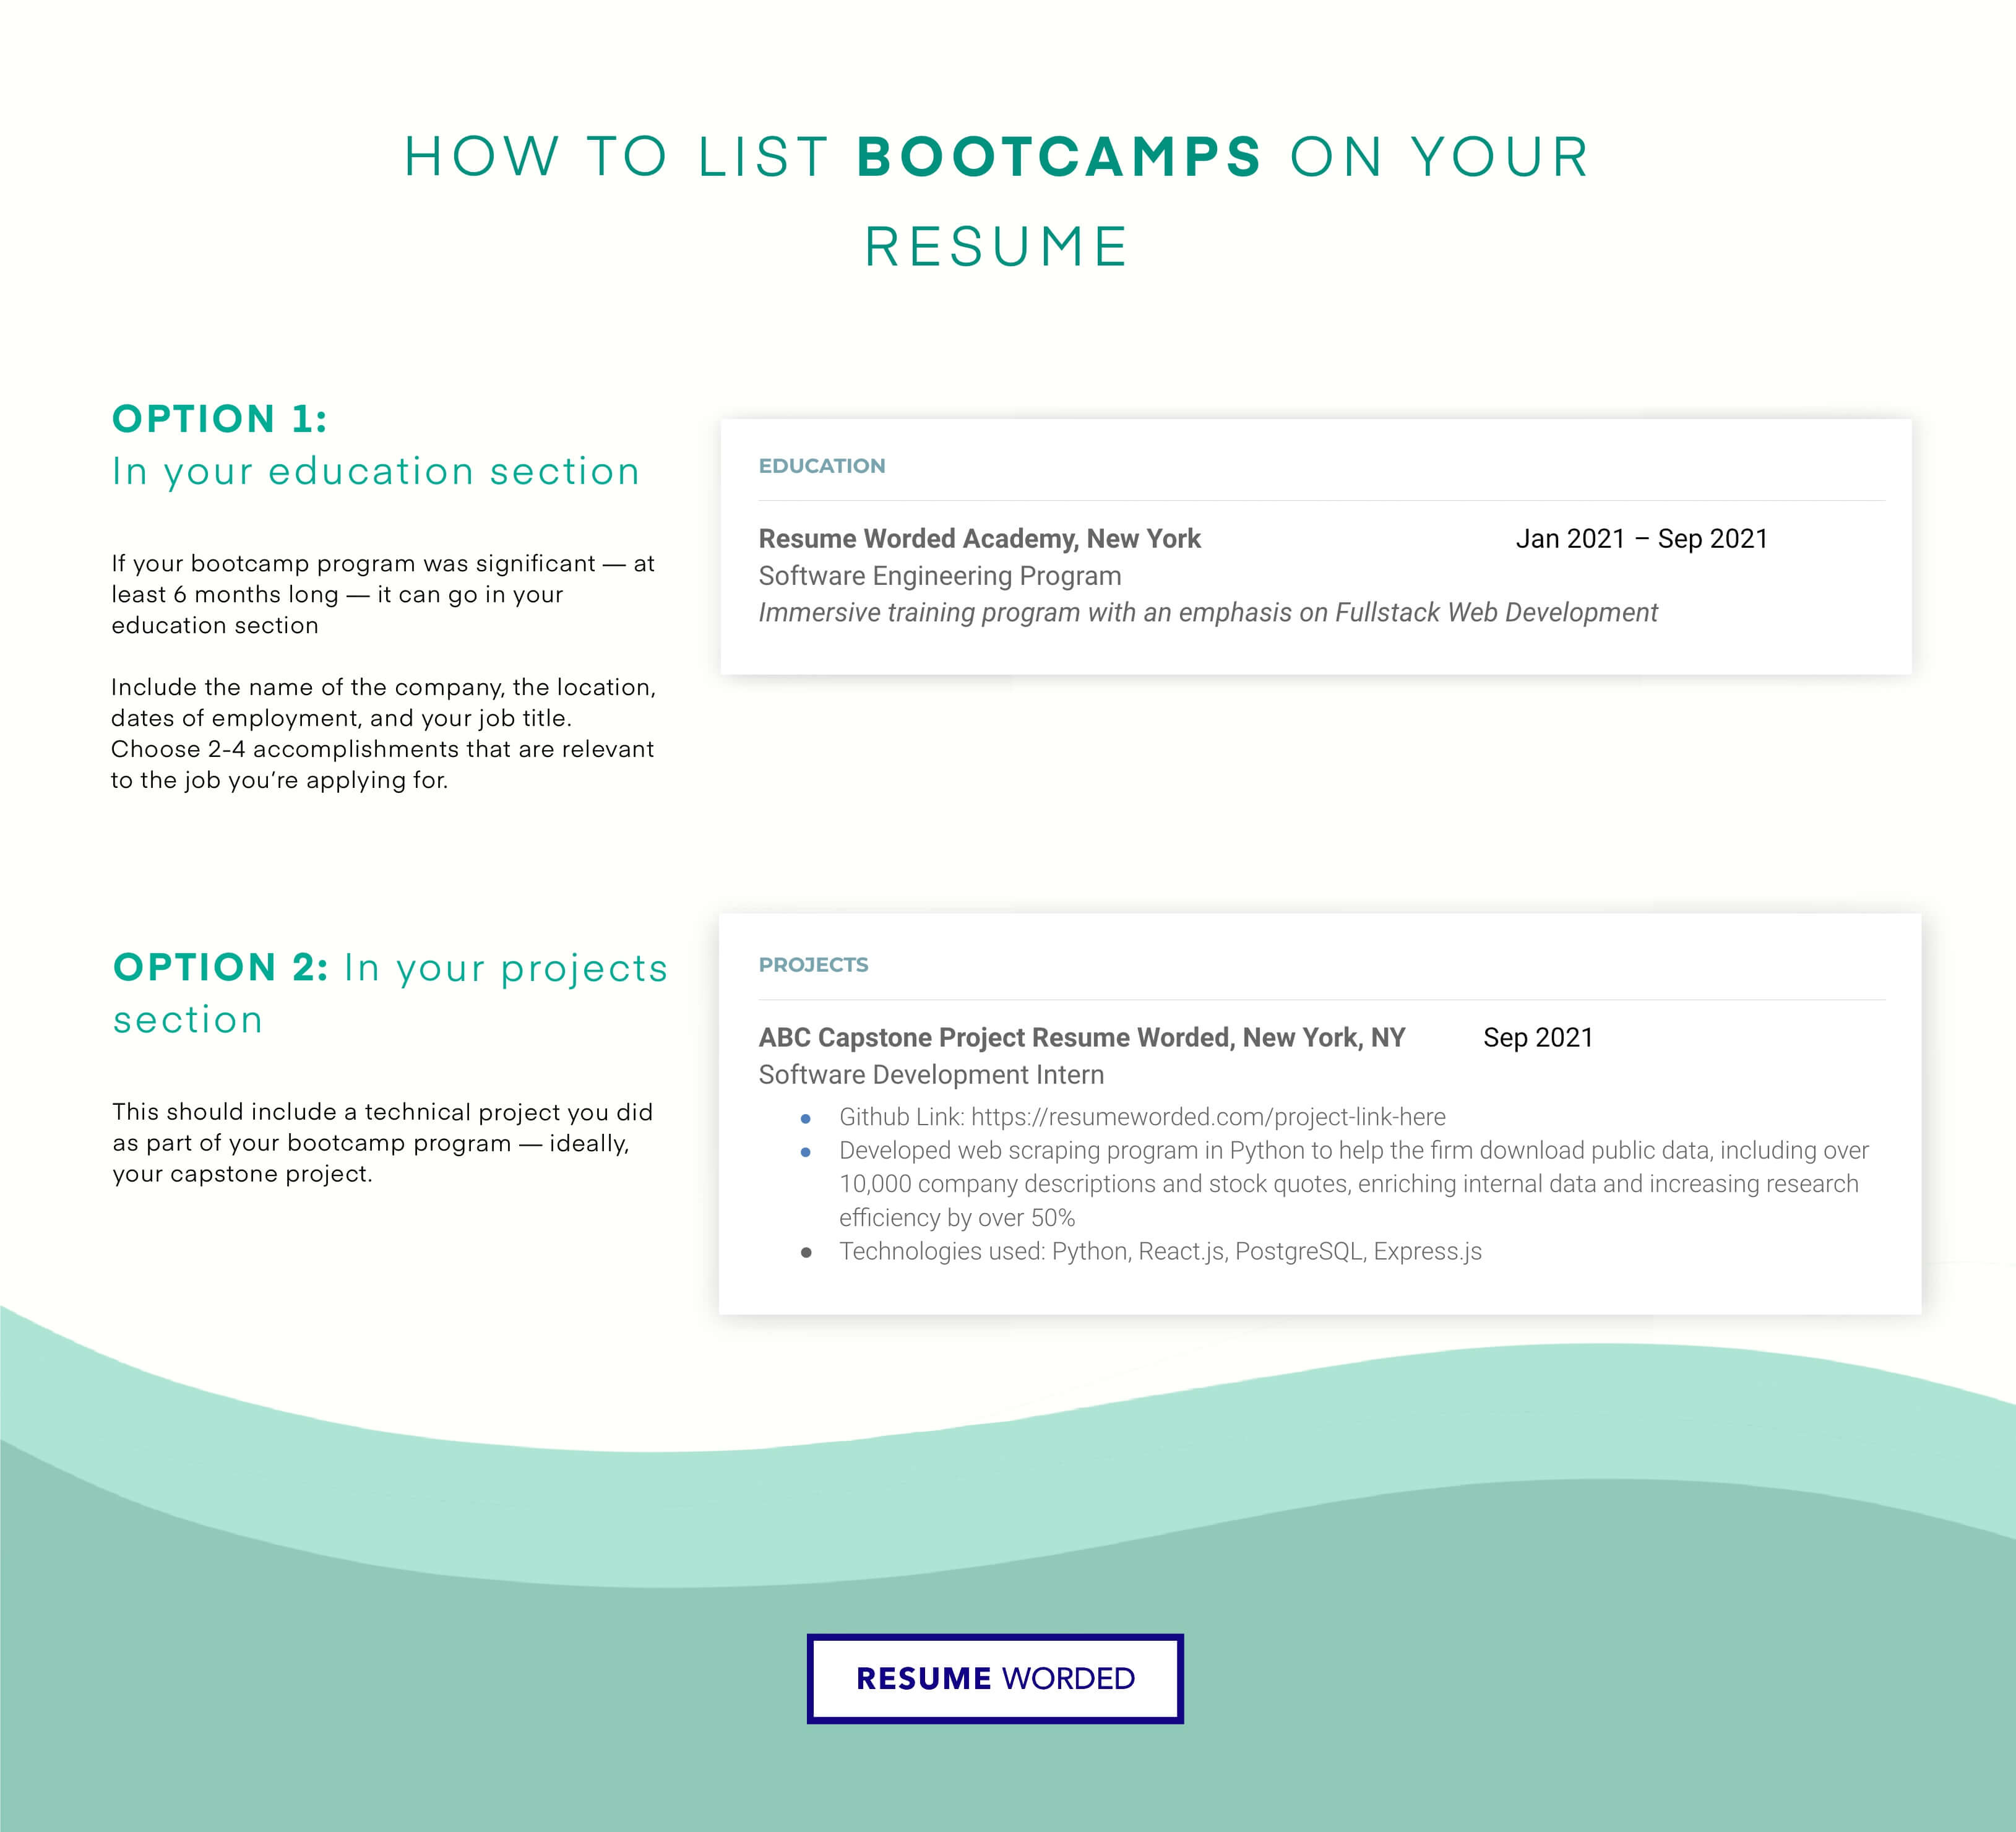 A detailed guide on how to list a bootcamp on a resume